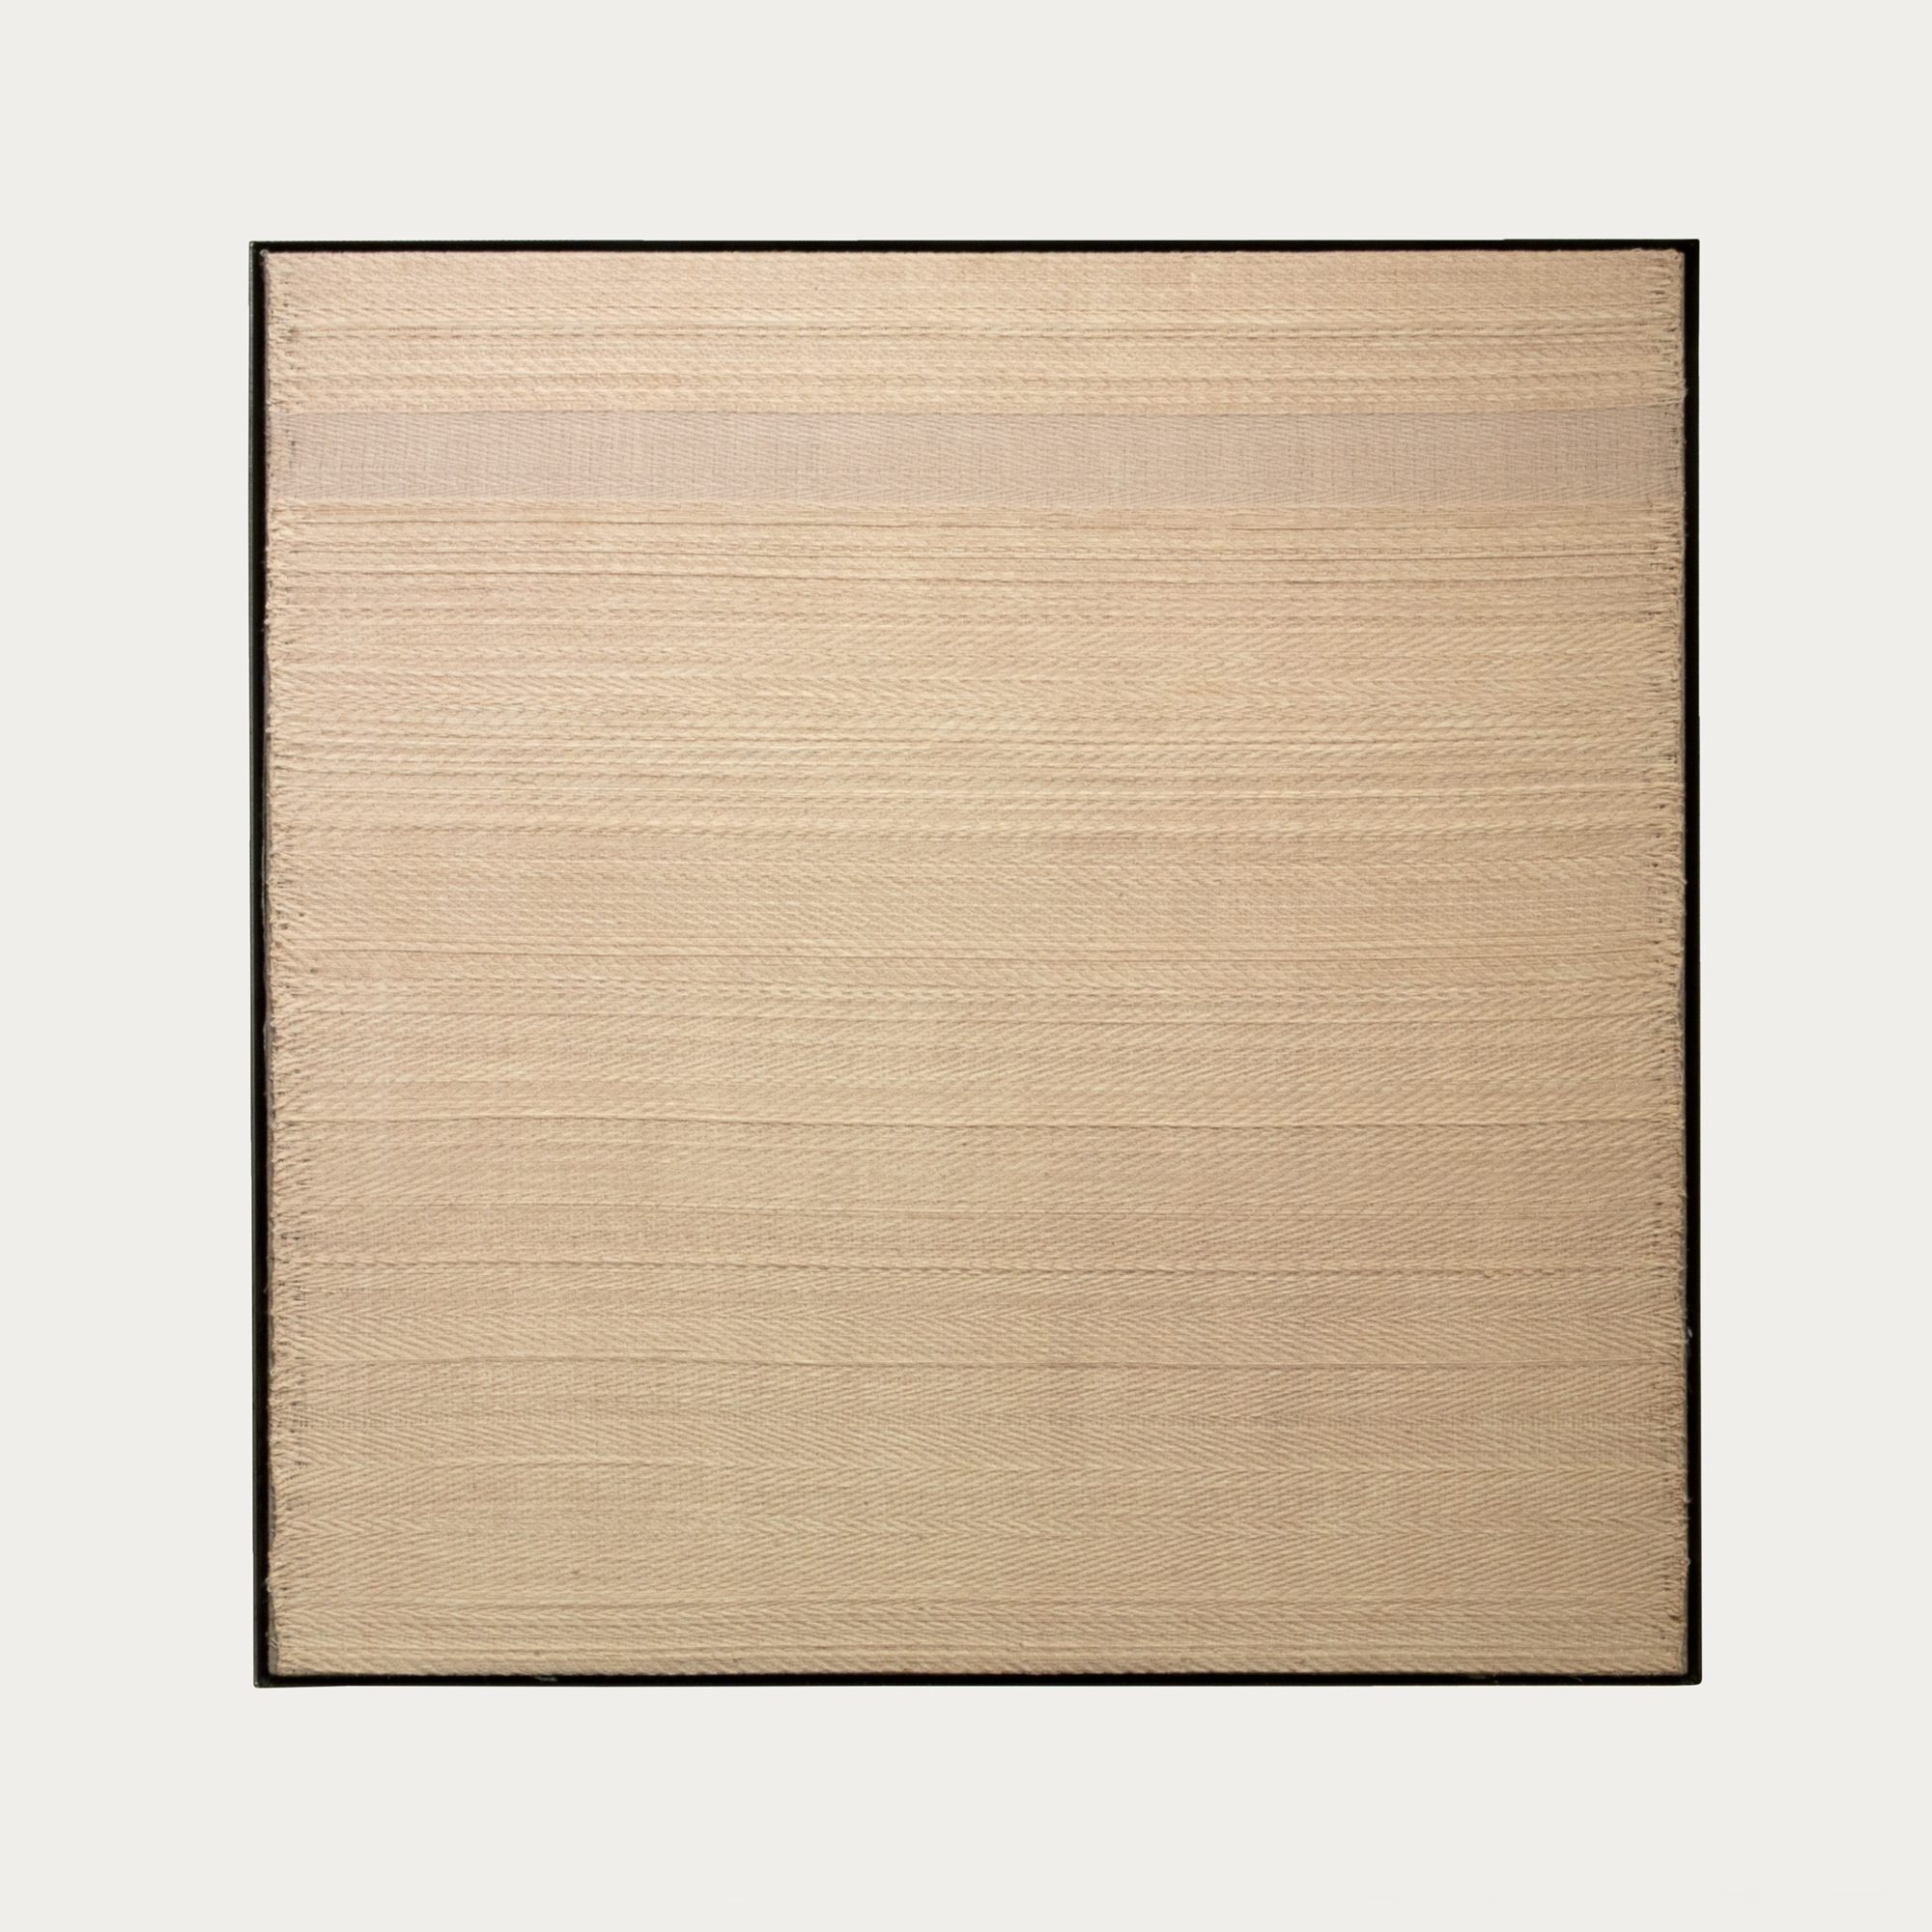 

											Elizabeth Hohimer</b>

											<em>
												Cessation</em> 

											<h4>
												June 26 – August 29, 2020											</h4>

		                																																													<i>Mirage 4,</i>  
																																								2020, 
																																								hand woven West Texas cotton stained with clay and copper thread stretched over linen in steel frame, 
																																								36 3/4 x 36 3/4 x 2 1/2 inches 
																								
		                				